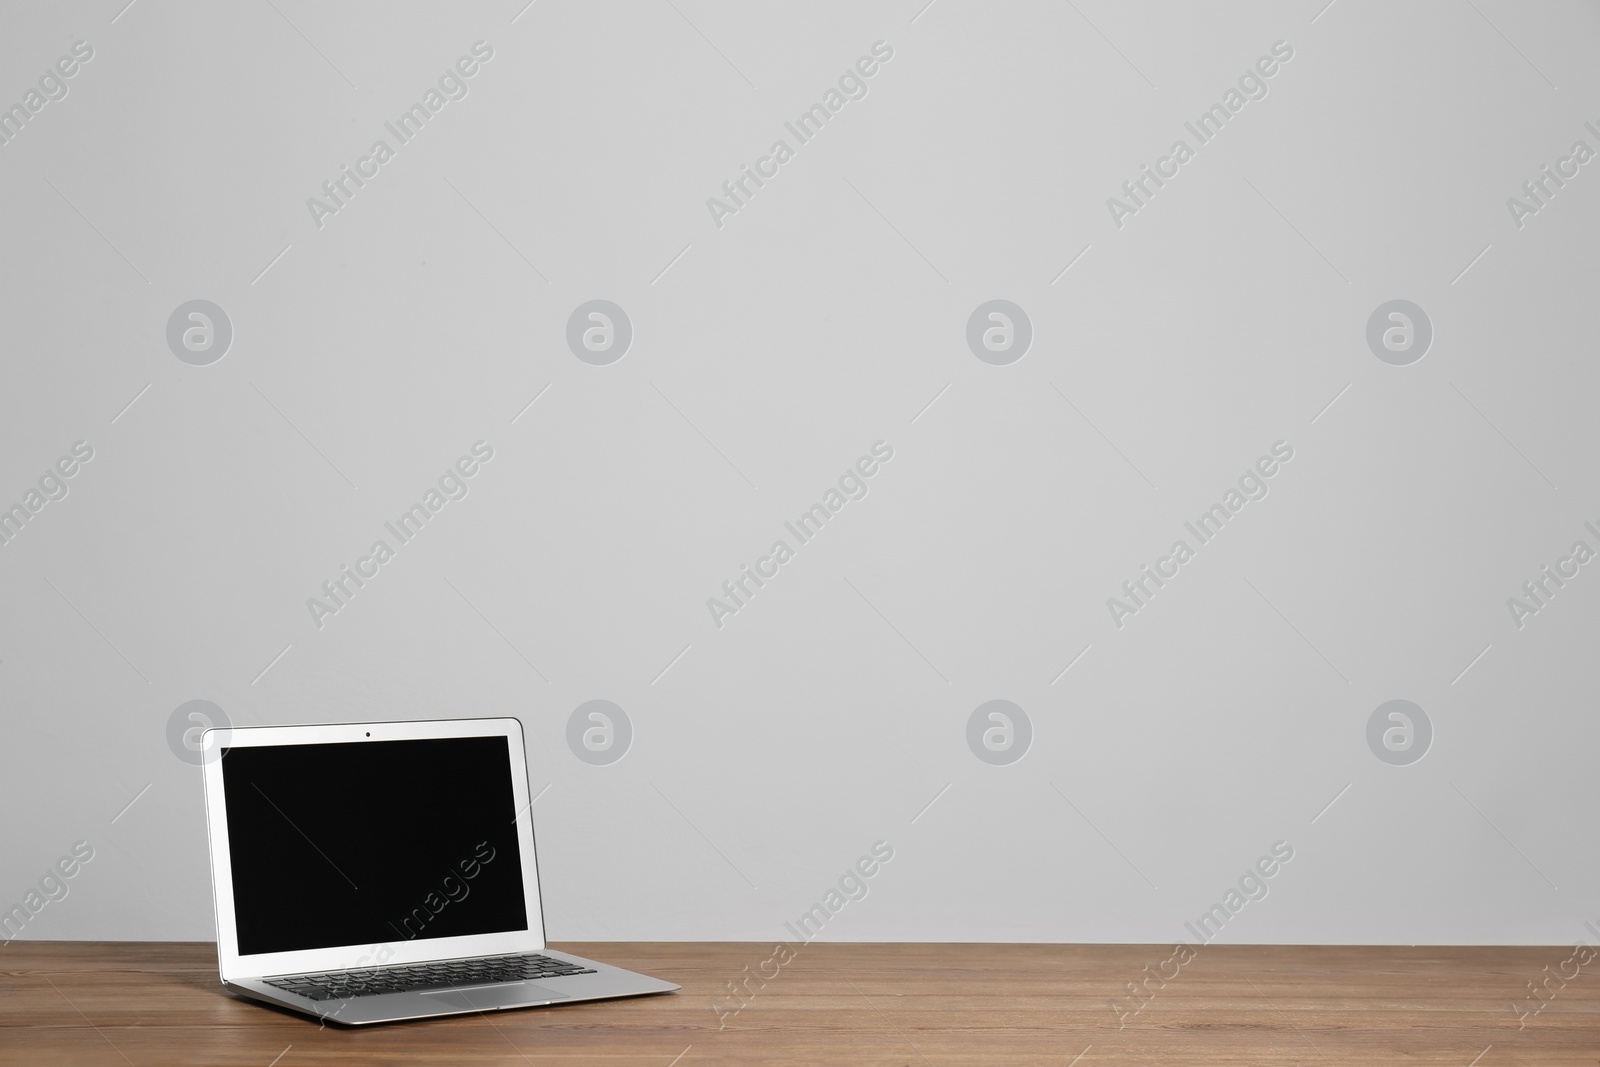 Photo of Modern laptop with blank screen on wooden table against gray background